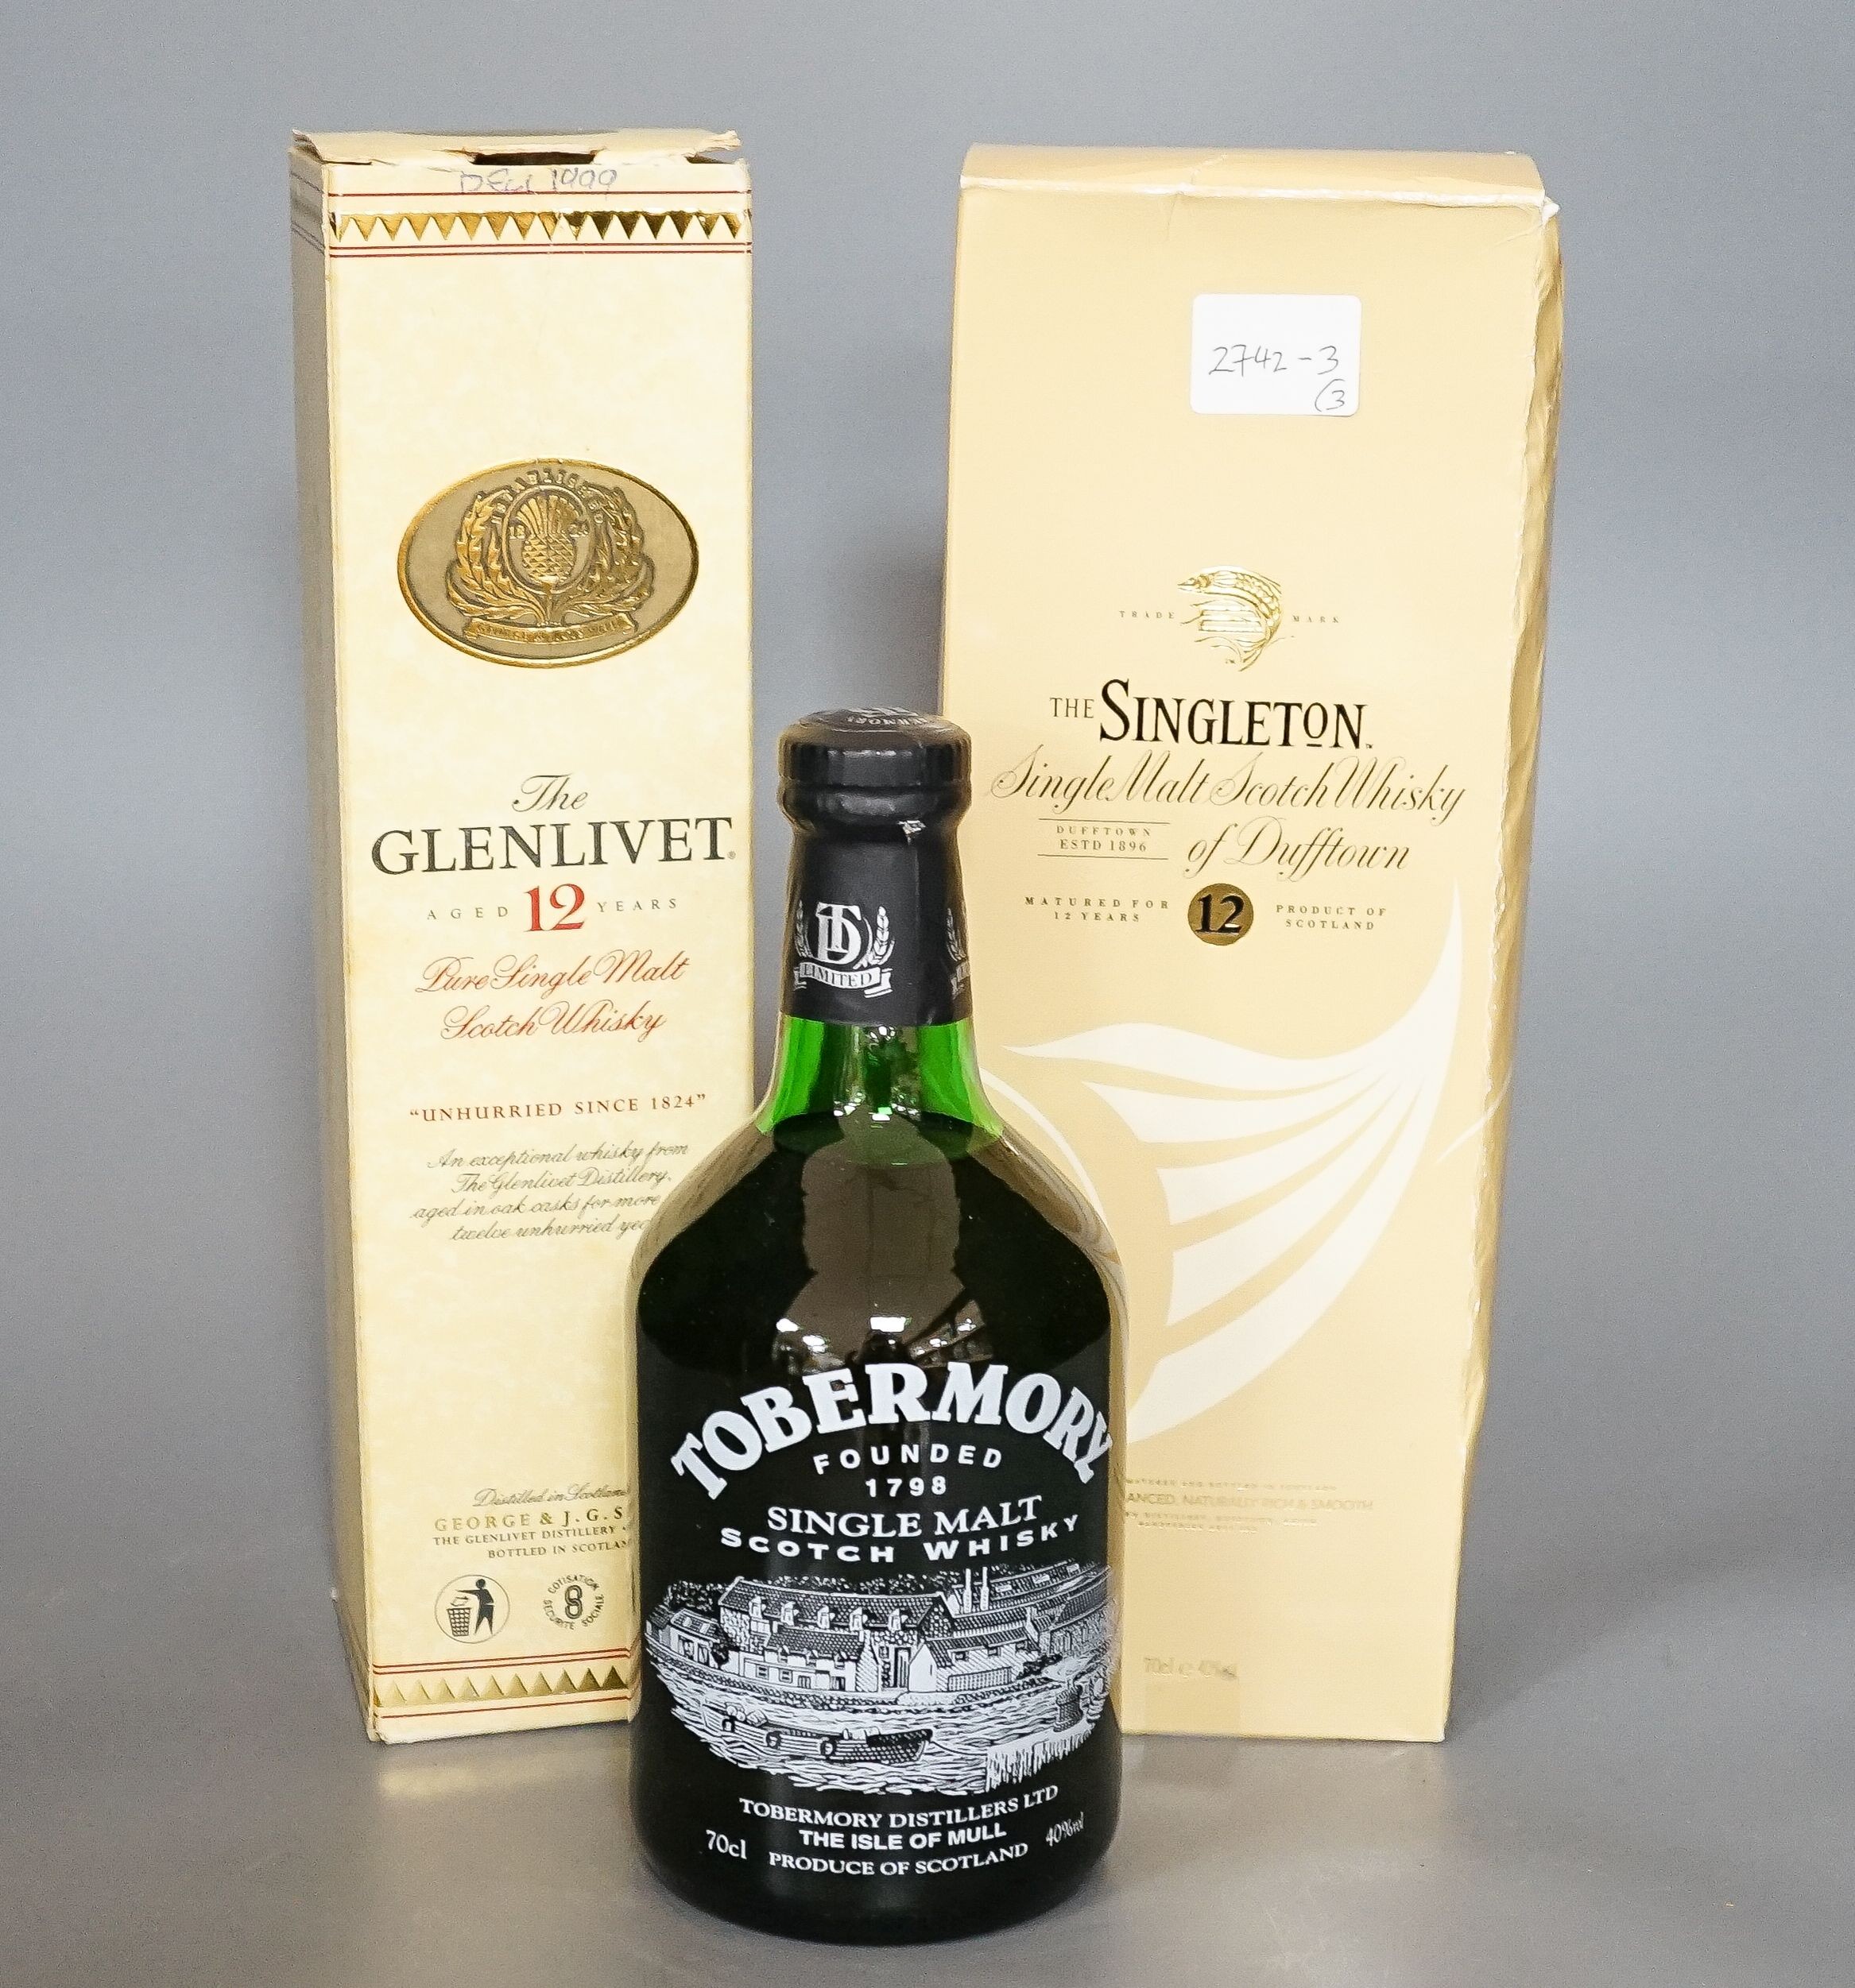 Three bottles of single malt whisky - The Singleton of Dufftown aged 12 years, Tobermory and The